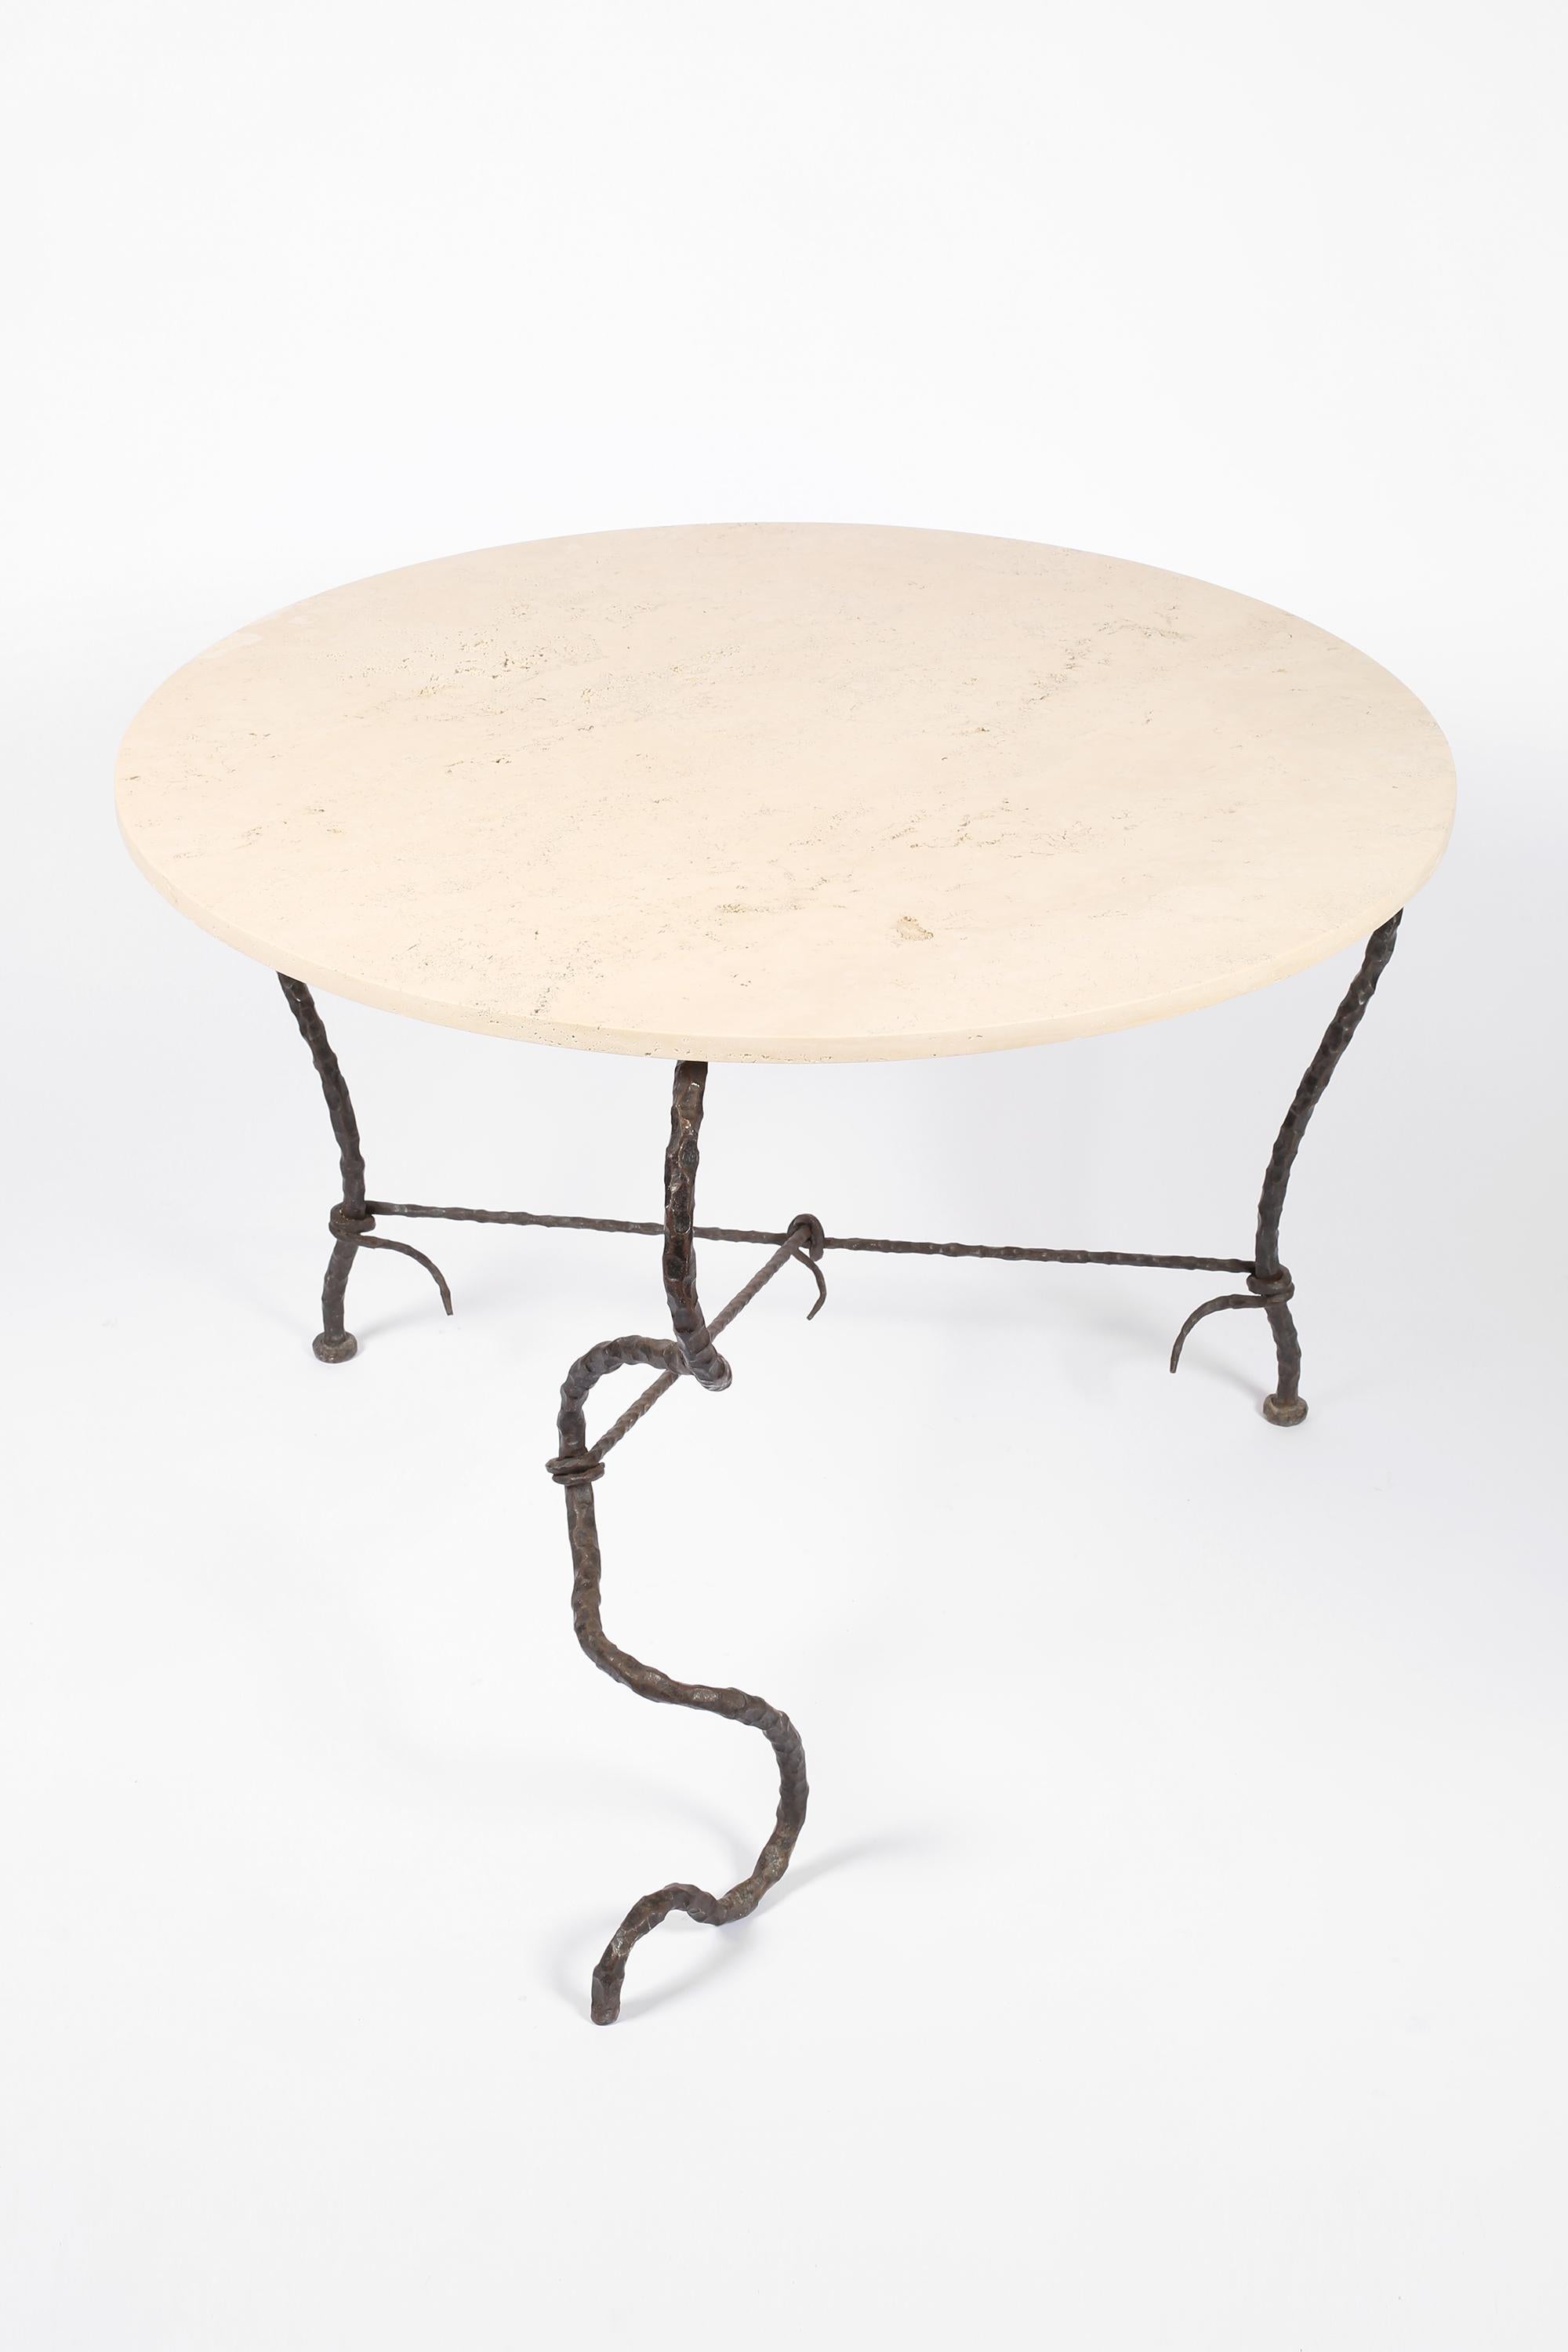 A statement, surrealist centre or dining table in forged iron with a circular travertine limestone top. The organic, serpent-like base bound by coiled supports in the manner of Diego Giacometti. French, c. 1950s.